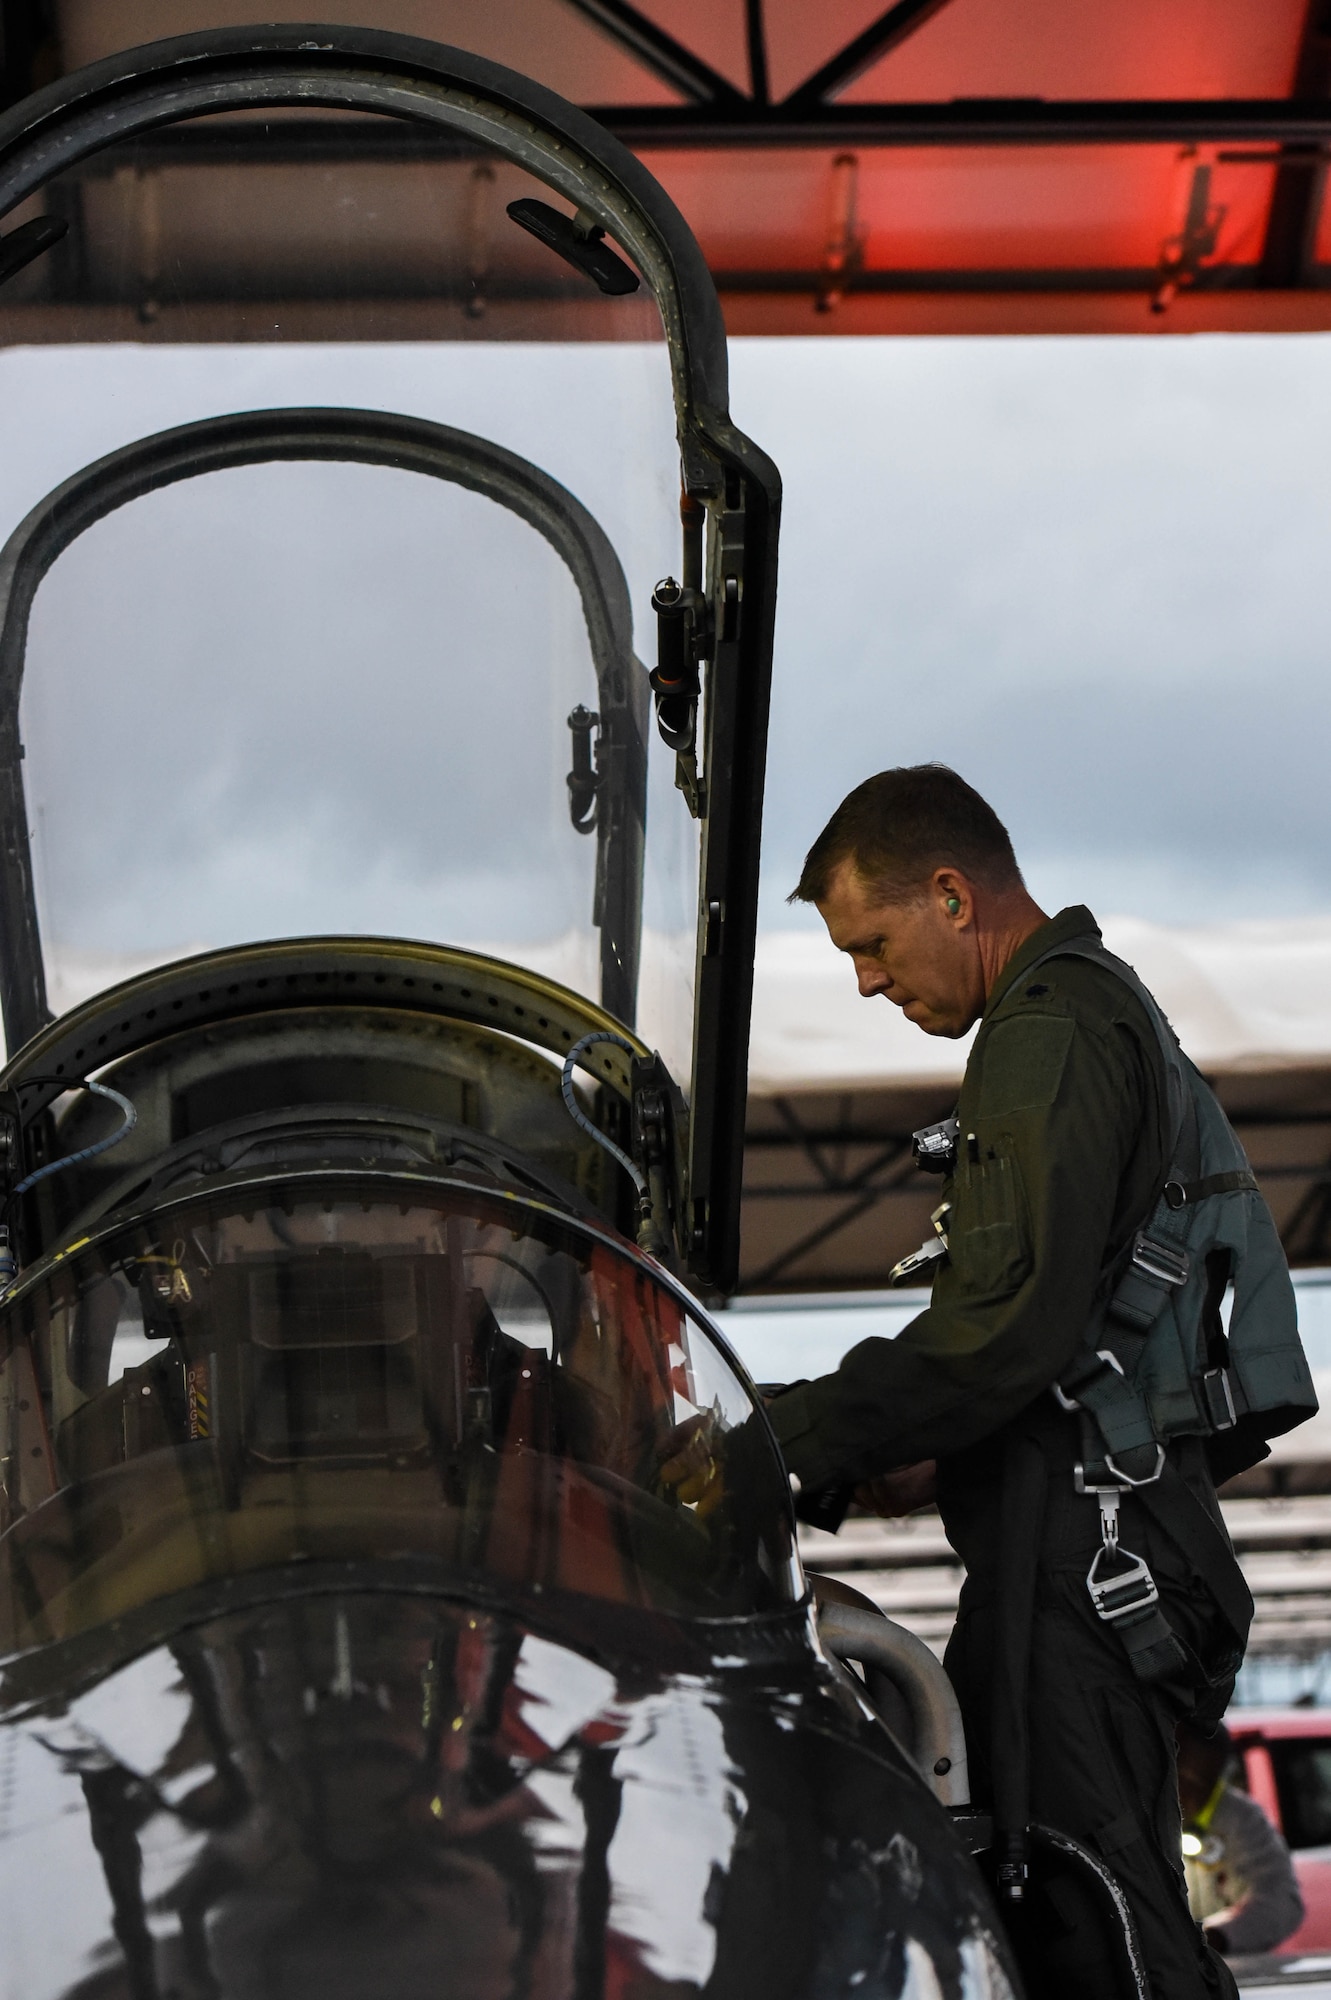 U.S. Air Force Lt. Col. David Easterling Jr., 43rd Flying Training Squadron instructor pilot, prepares to enter the cockpit of a T-38 Talon on September 23, 2020, at Columbus Air Force Base, Miss. The T-38 has swept wings, a streamlined fuselage and tricycle landing gear with a steerable nose wheel. (U.S. Air Force photo by Airman 1st Class Davis Donaldson)